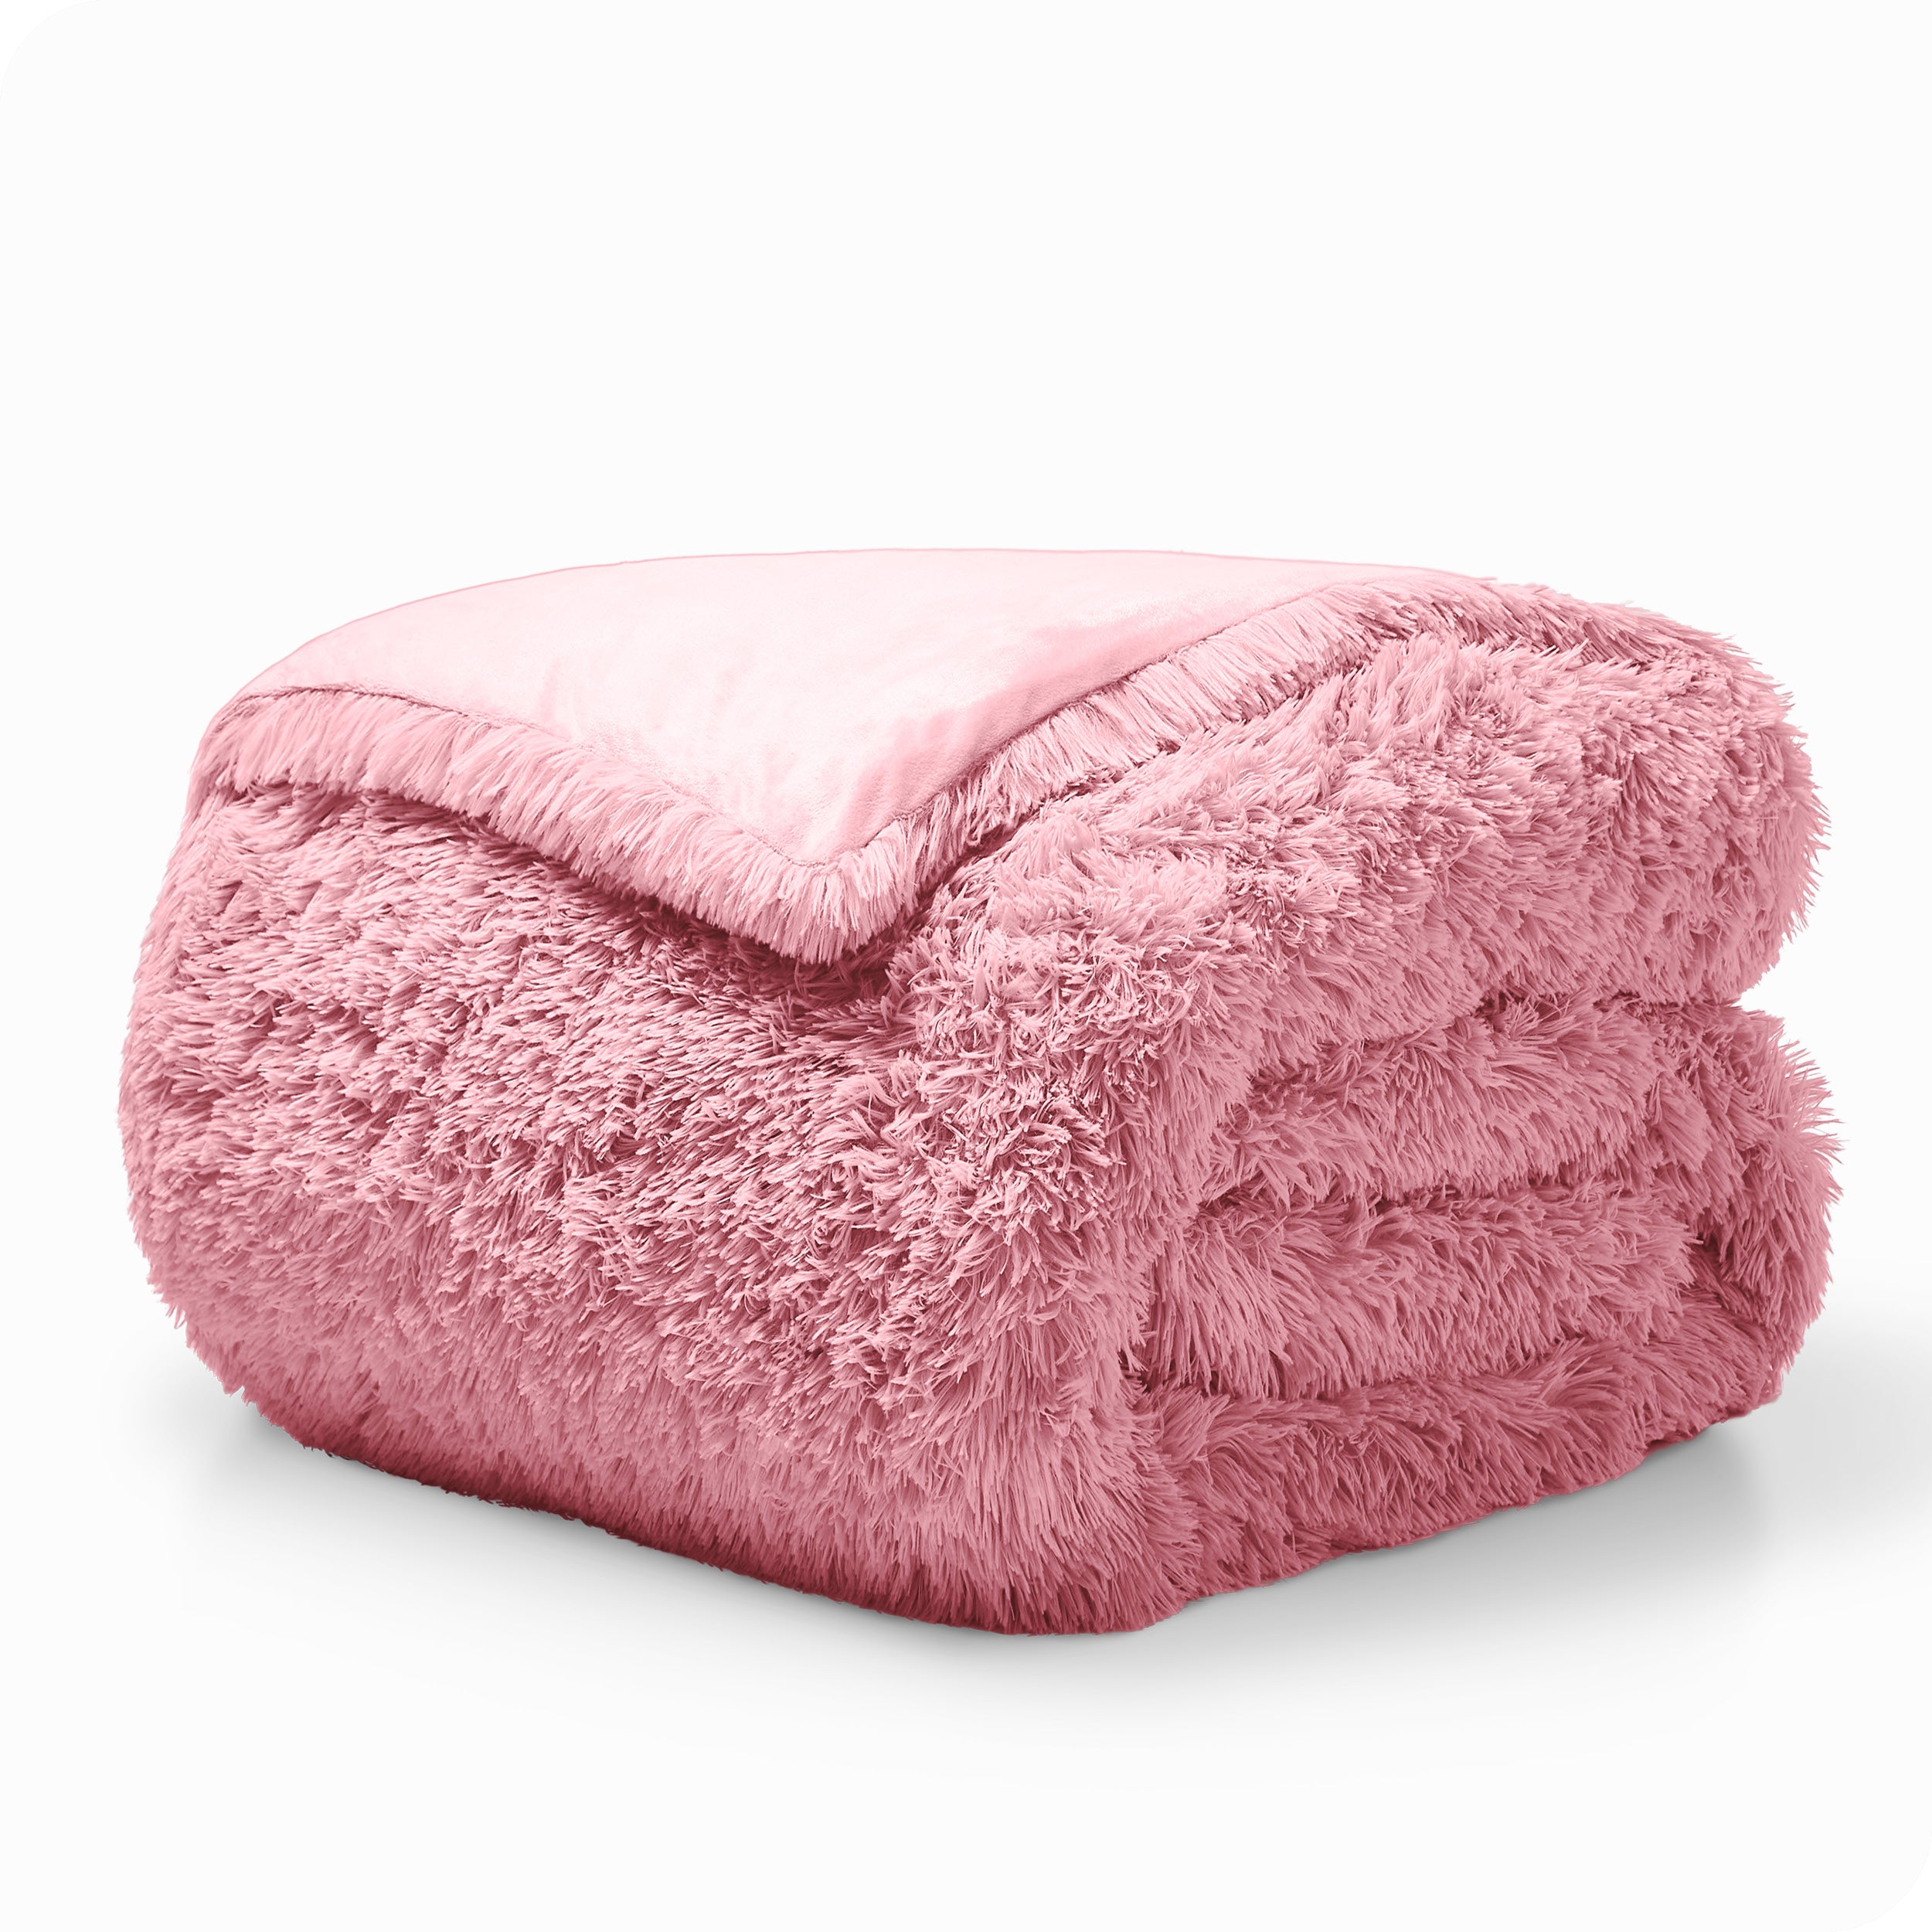 A pink shaggy duvet cover folded neatly